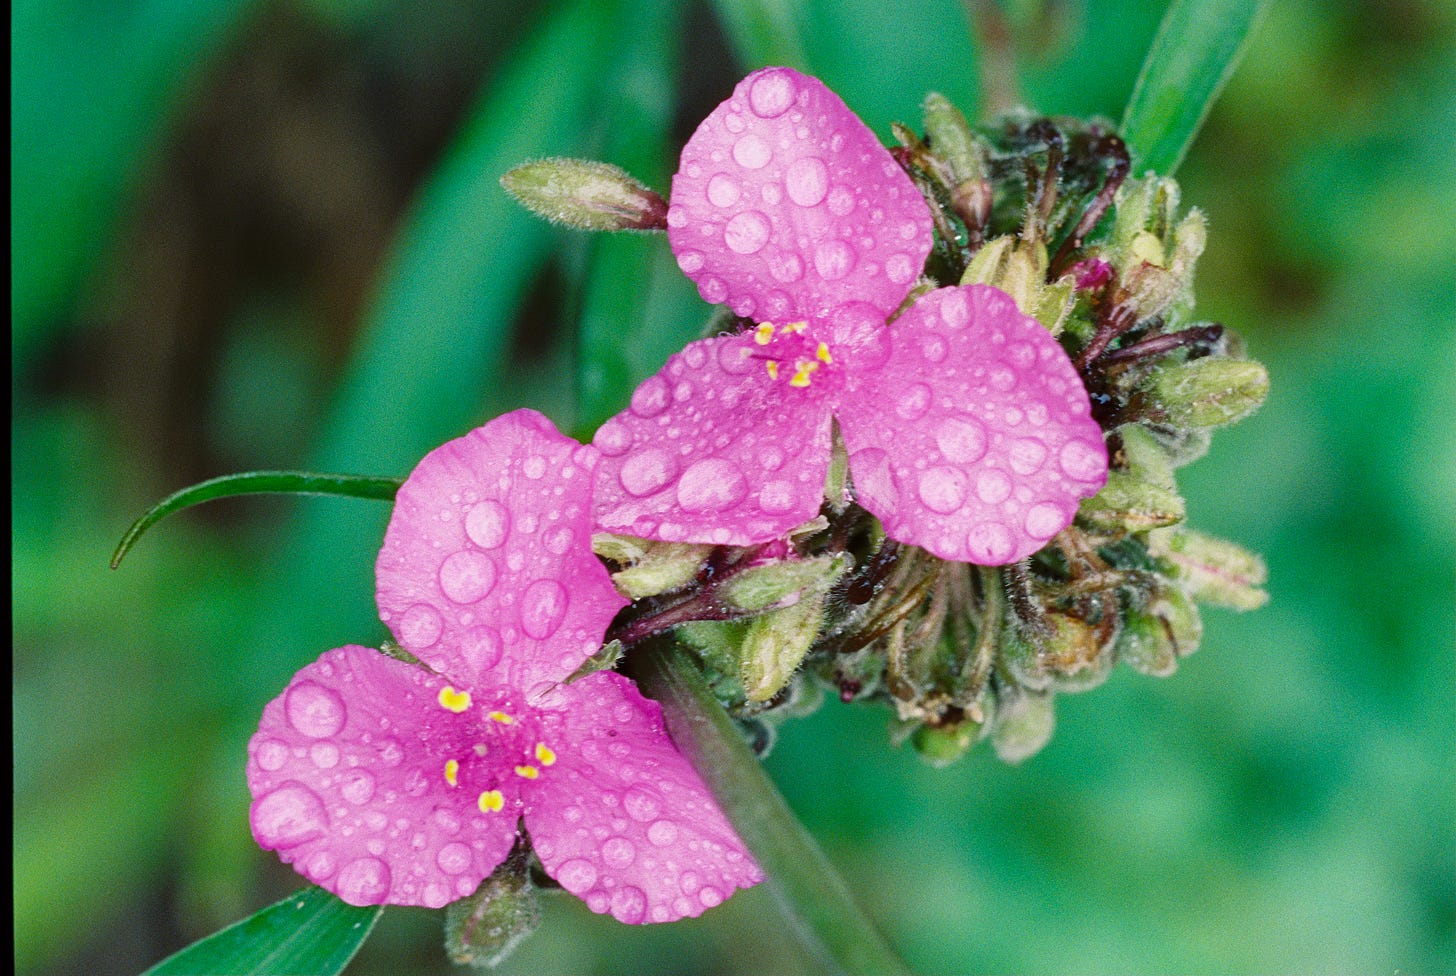 Spiderwort blossoms with raindrops